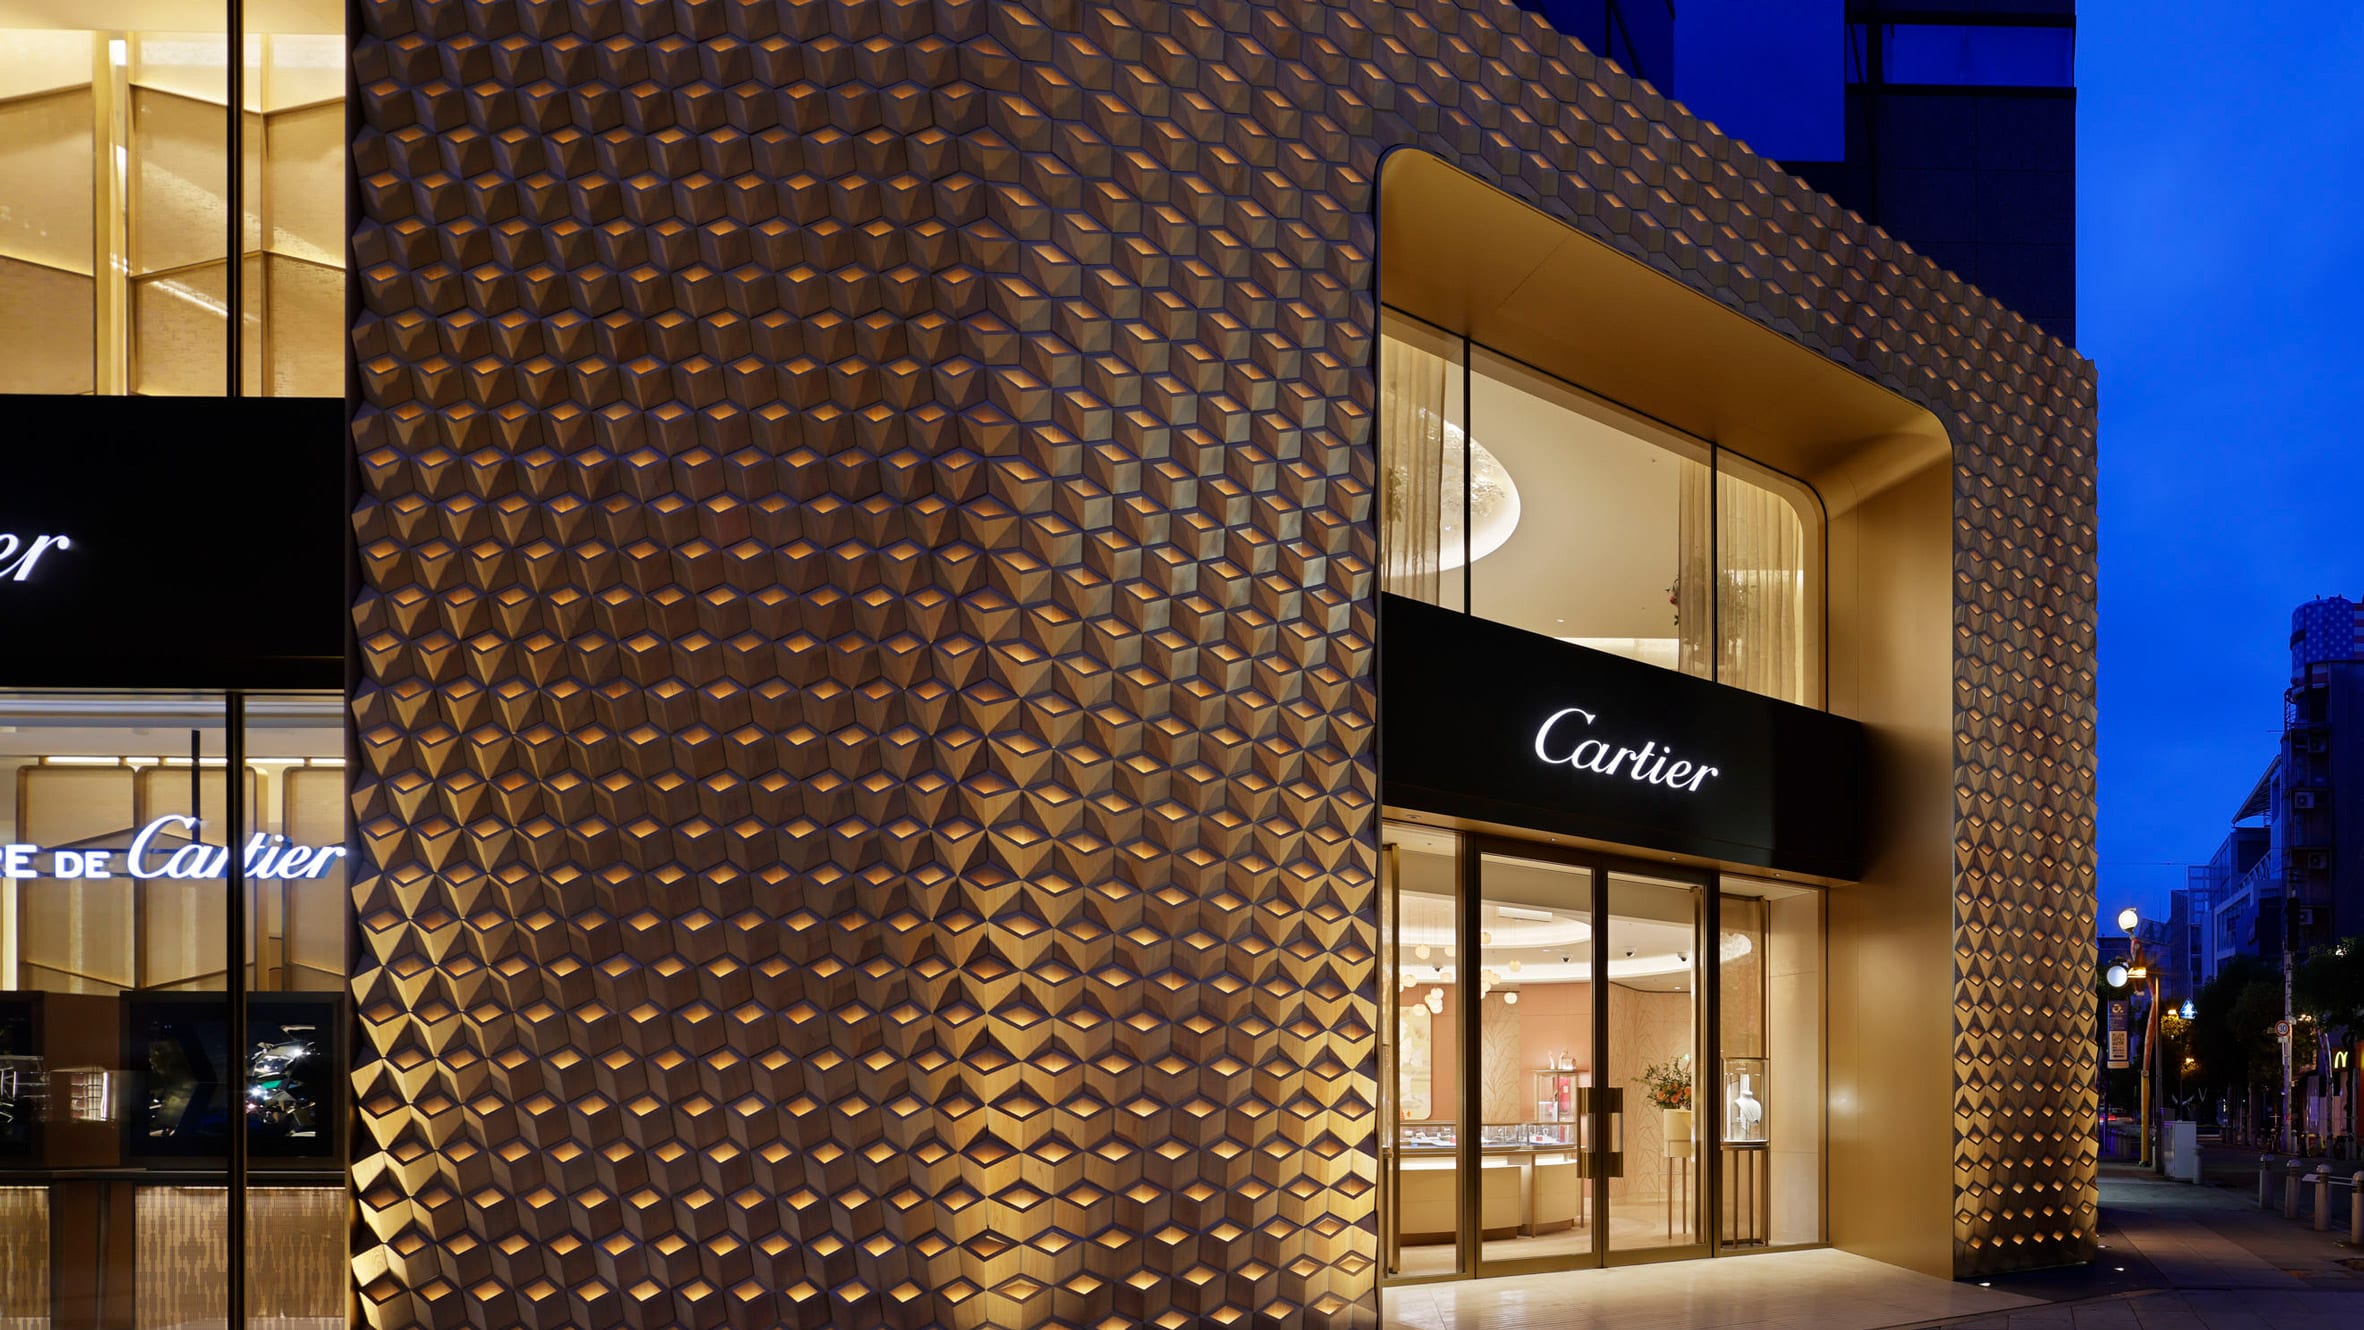 Klein Dytham Architecture creates intricate wooden shop front for Cartier